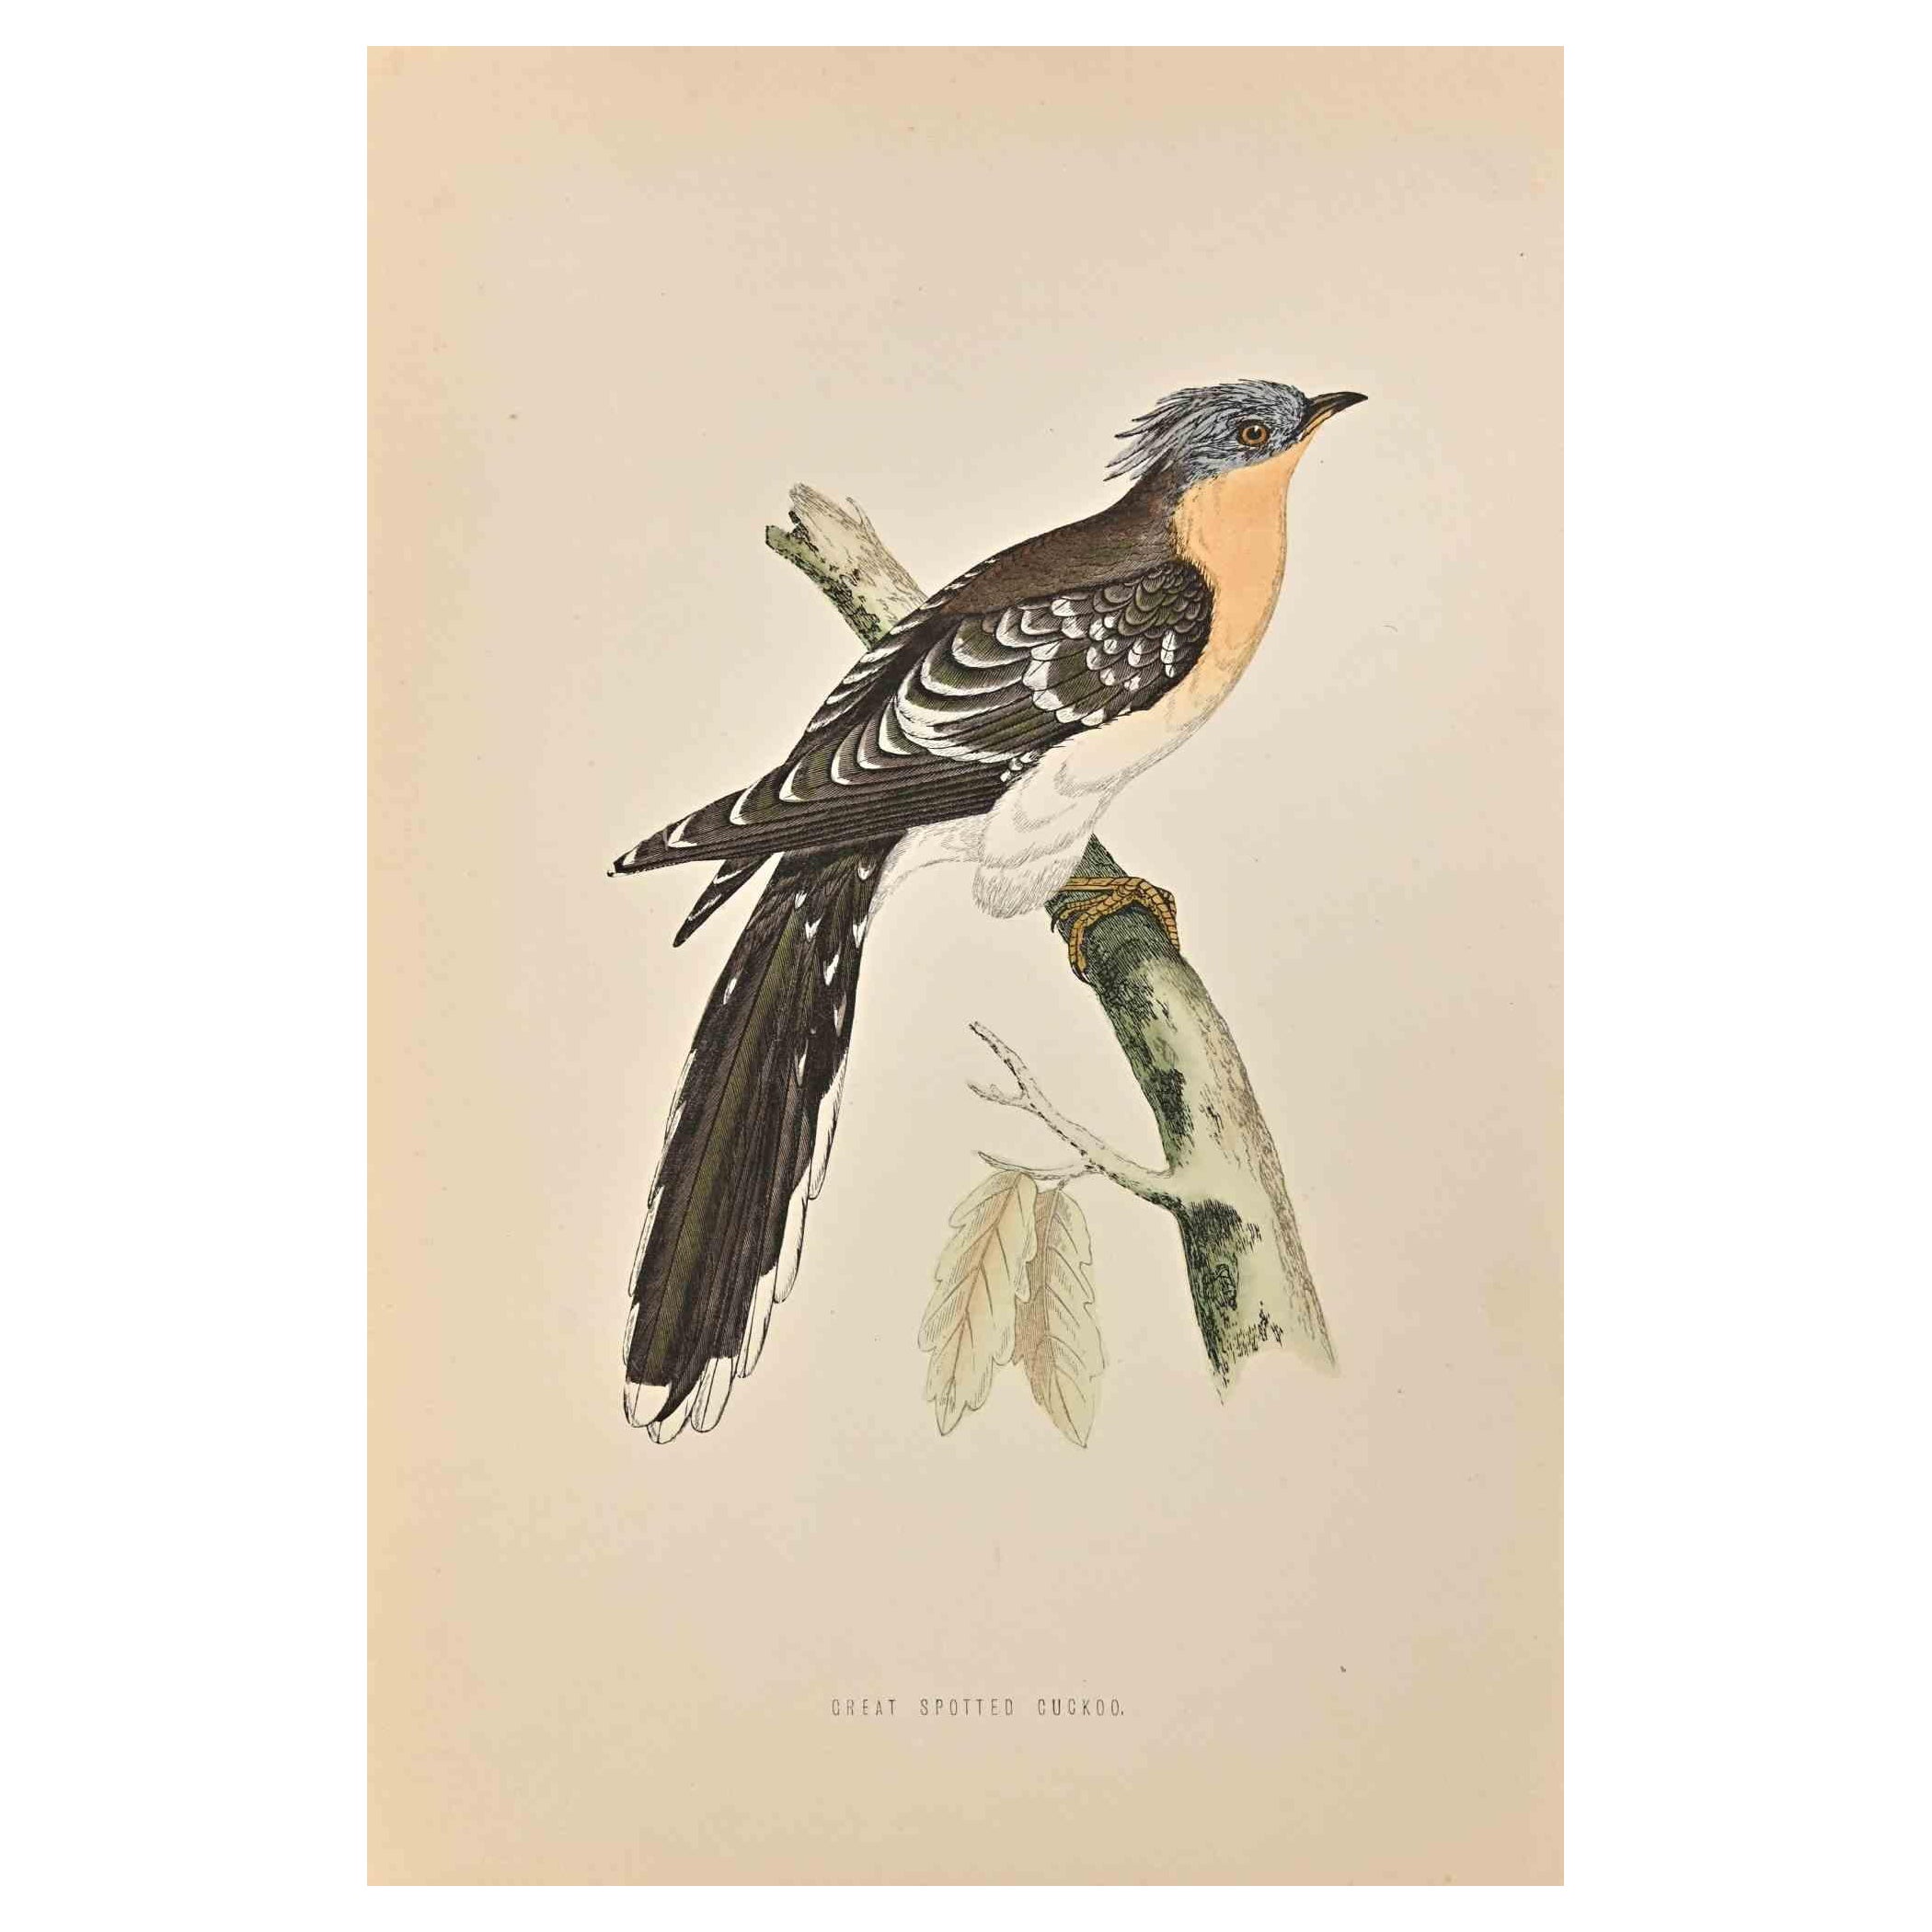 Great Spotted Cuckoo is a modern artwork realized in 1870 by the British artist Alexander Francis Lydon (1836-1917) . 

Woodcut print, hand colored, published by London, Bell & Sons, 1870.  Name of the bird printed in plate. This work is part of a